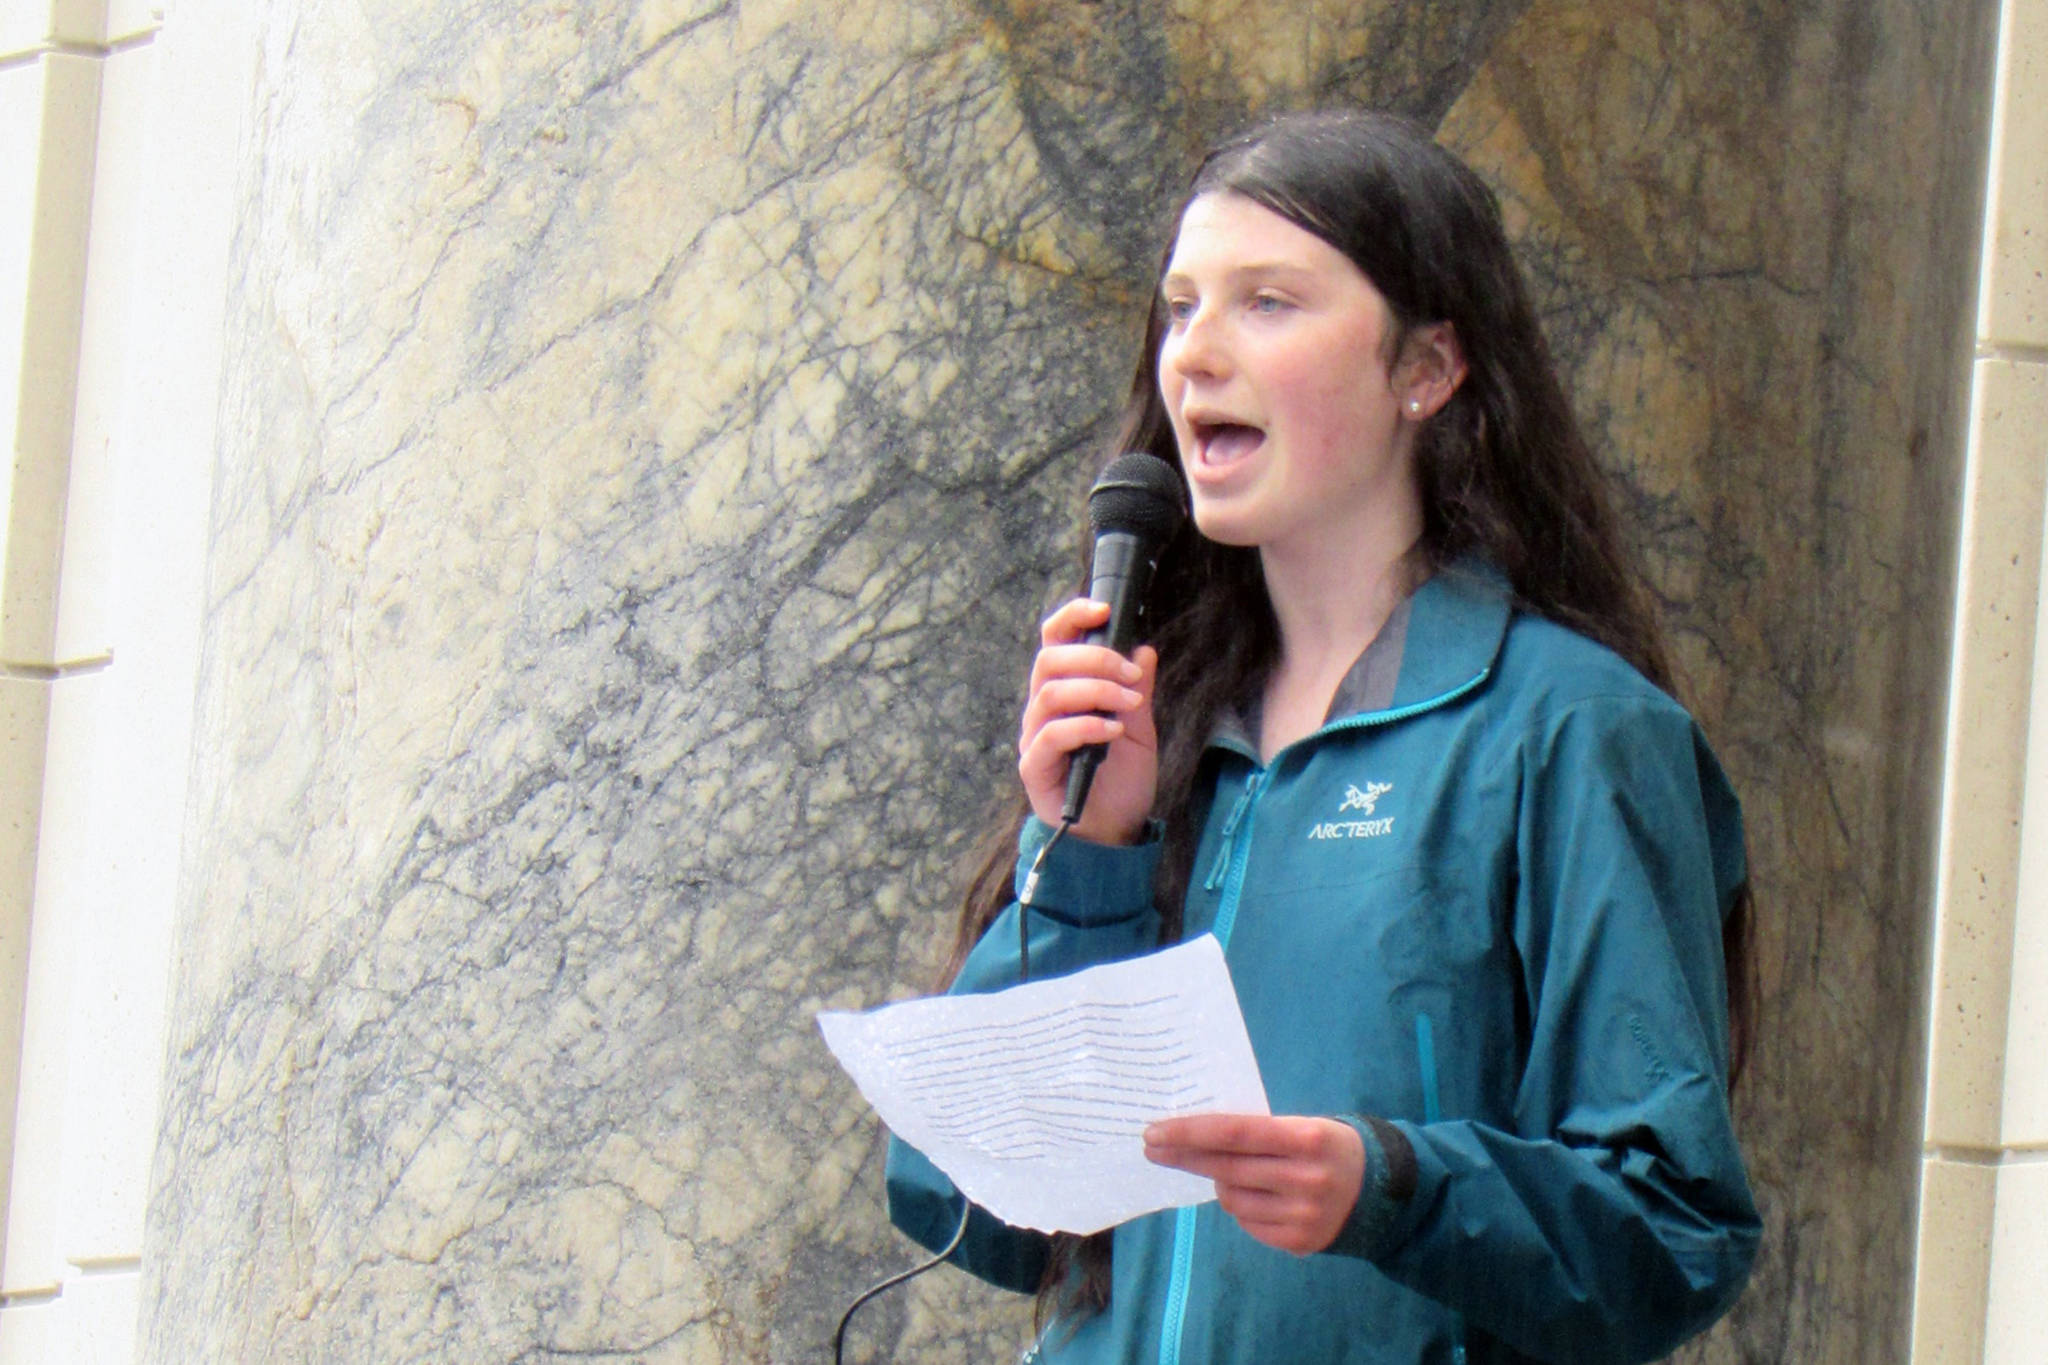 Linnea Lentfer, a JDHS sophomore, speaks about the importance of prioritizing climate change and the damage a dependency on fossil fuels has on the environment during a climate change rally at the Alaska State Capitol, Friday, May 3, 2019. (Ben Hohenstatt | Juneau Empire)